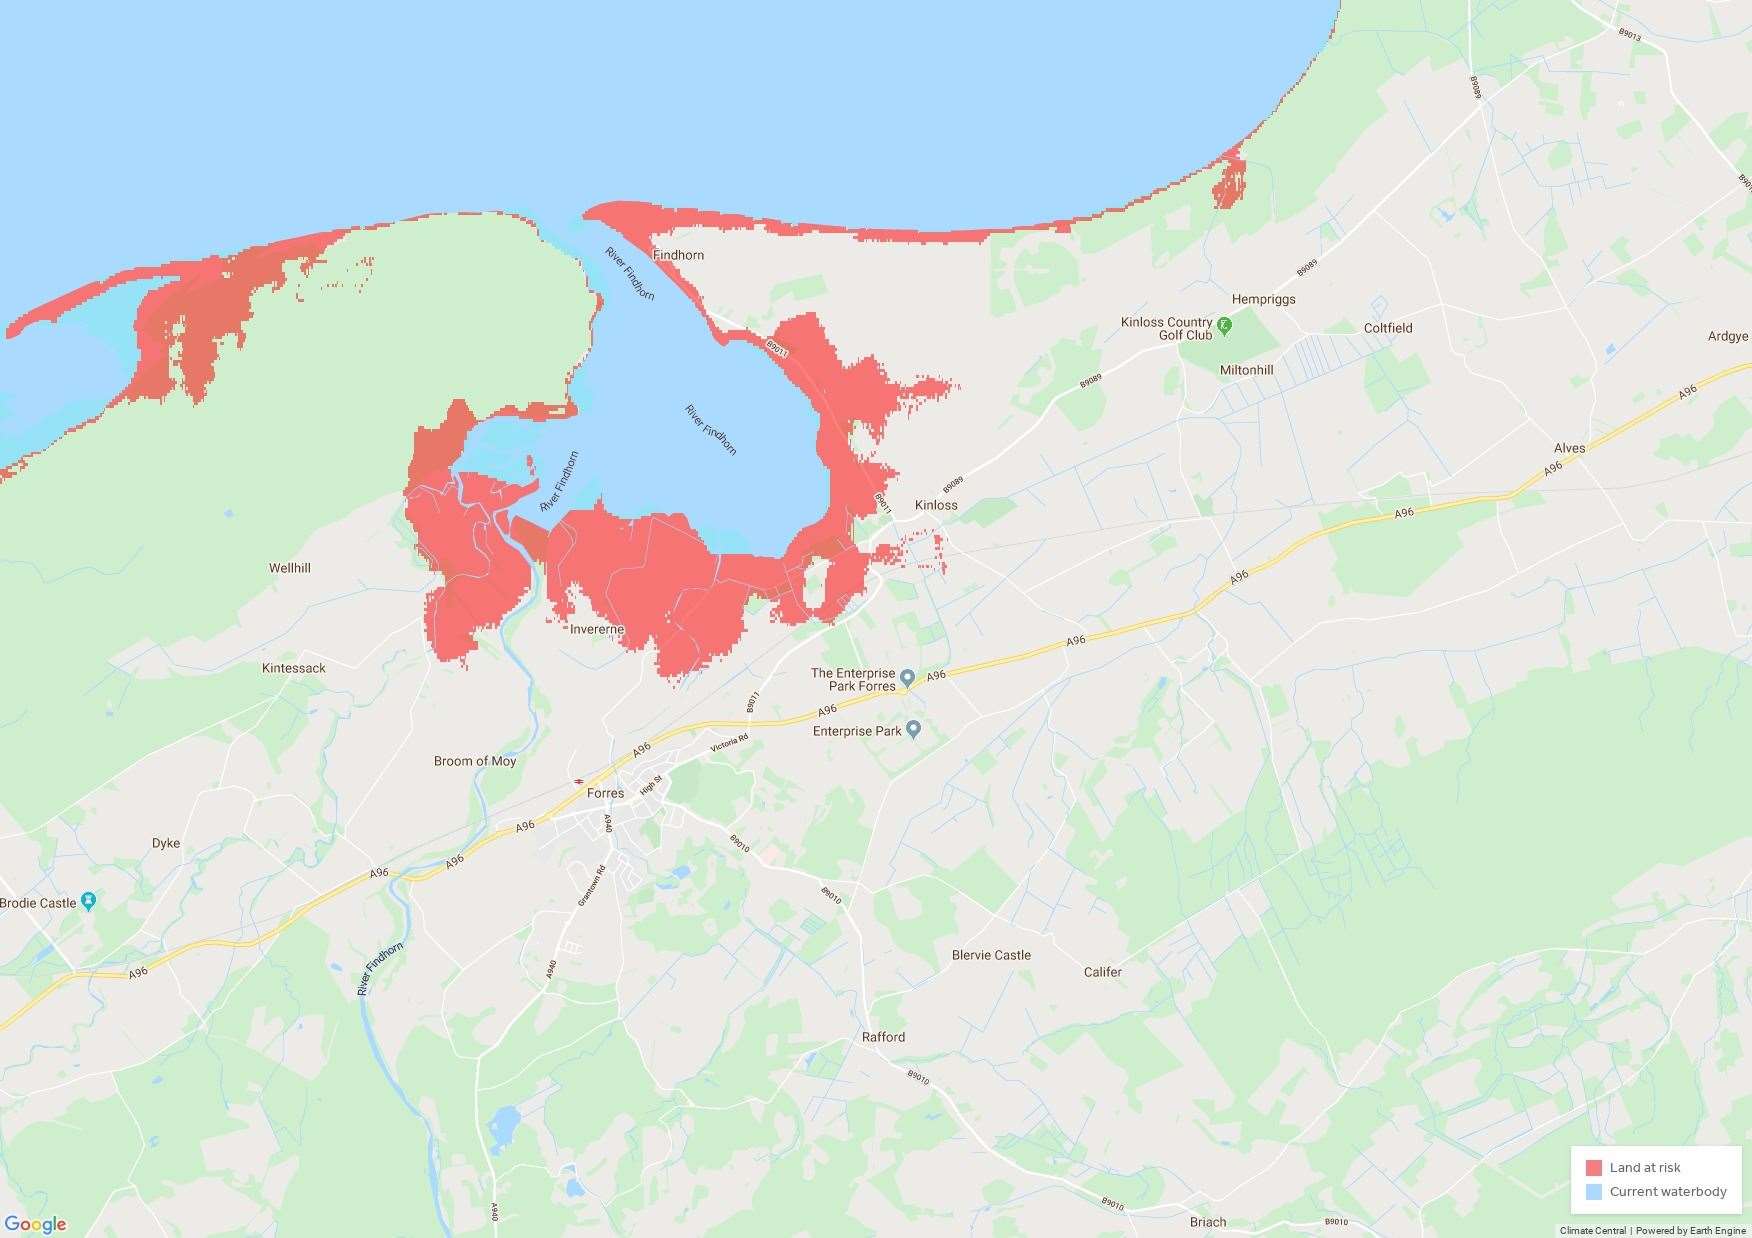 Climate Central, a US-based climate science organisation, has created this map of Findhorn Bay as it may look by 2050.